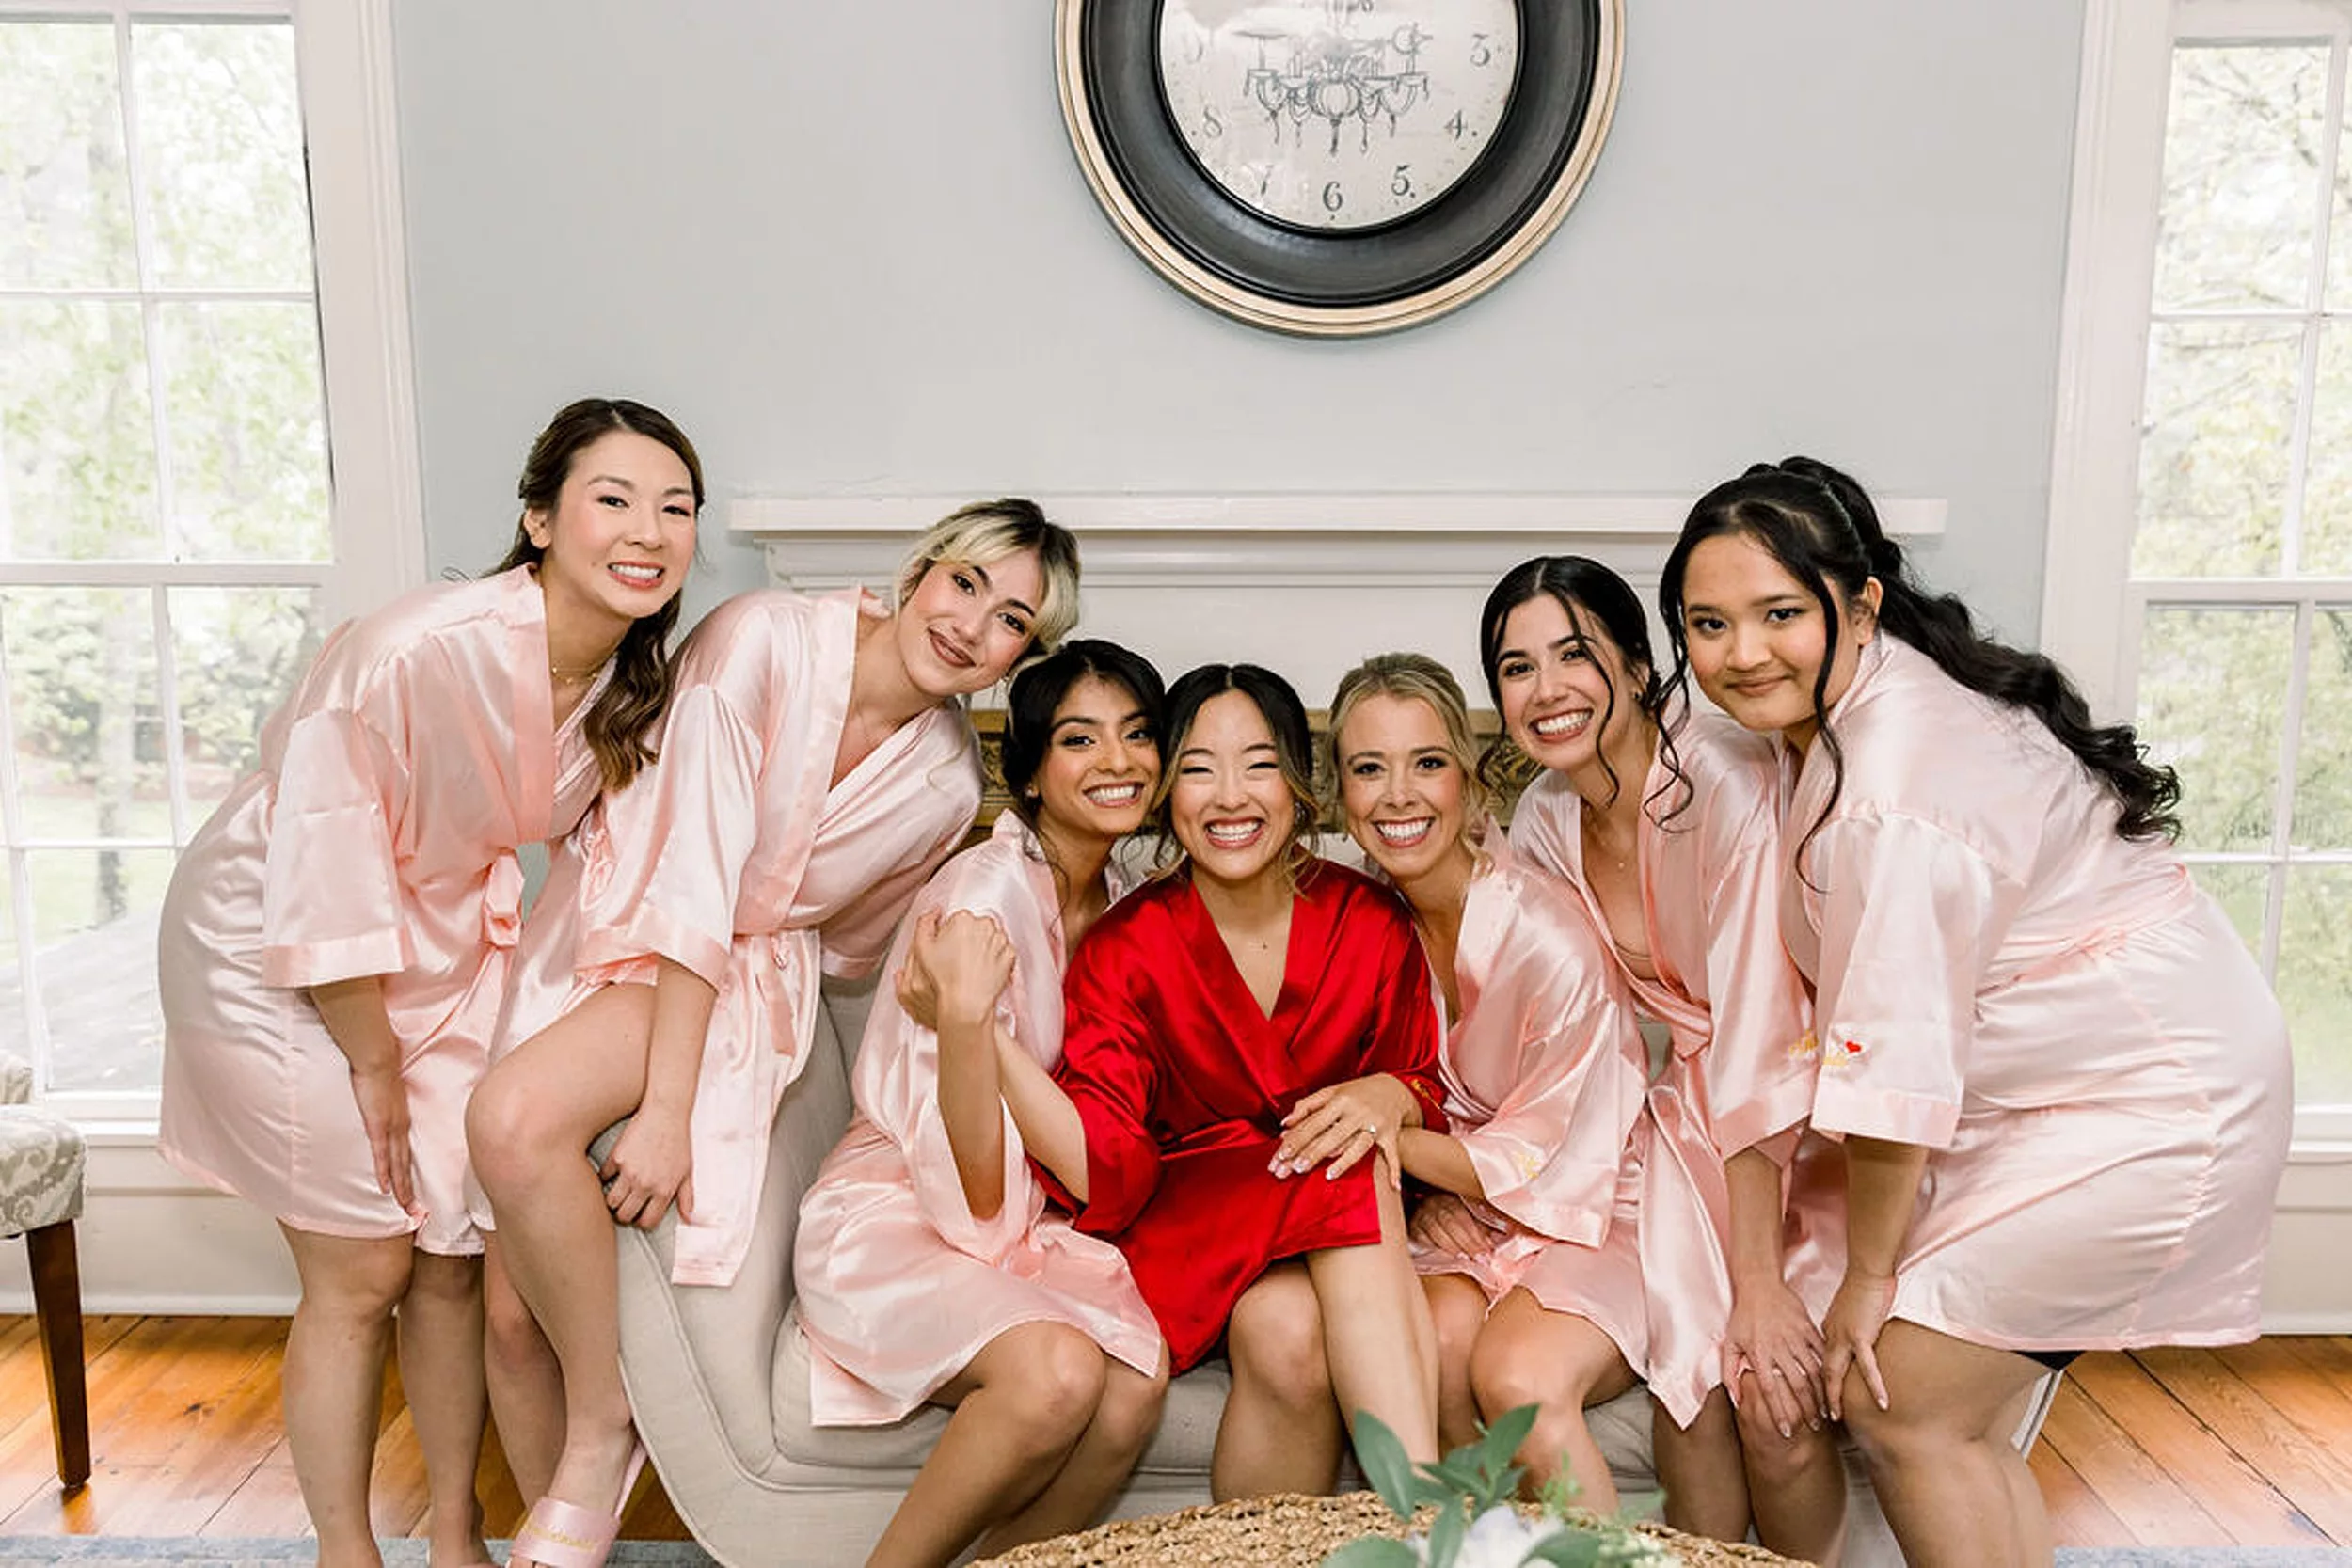 A bride laughs and sits on a couch with her six bridesmaids in pink robes while she wears a red robe